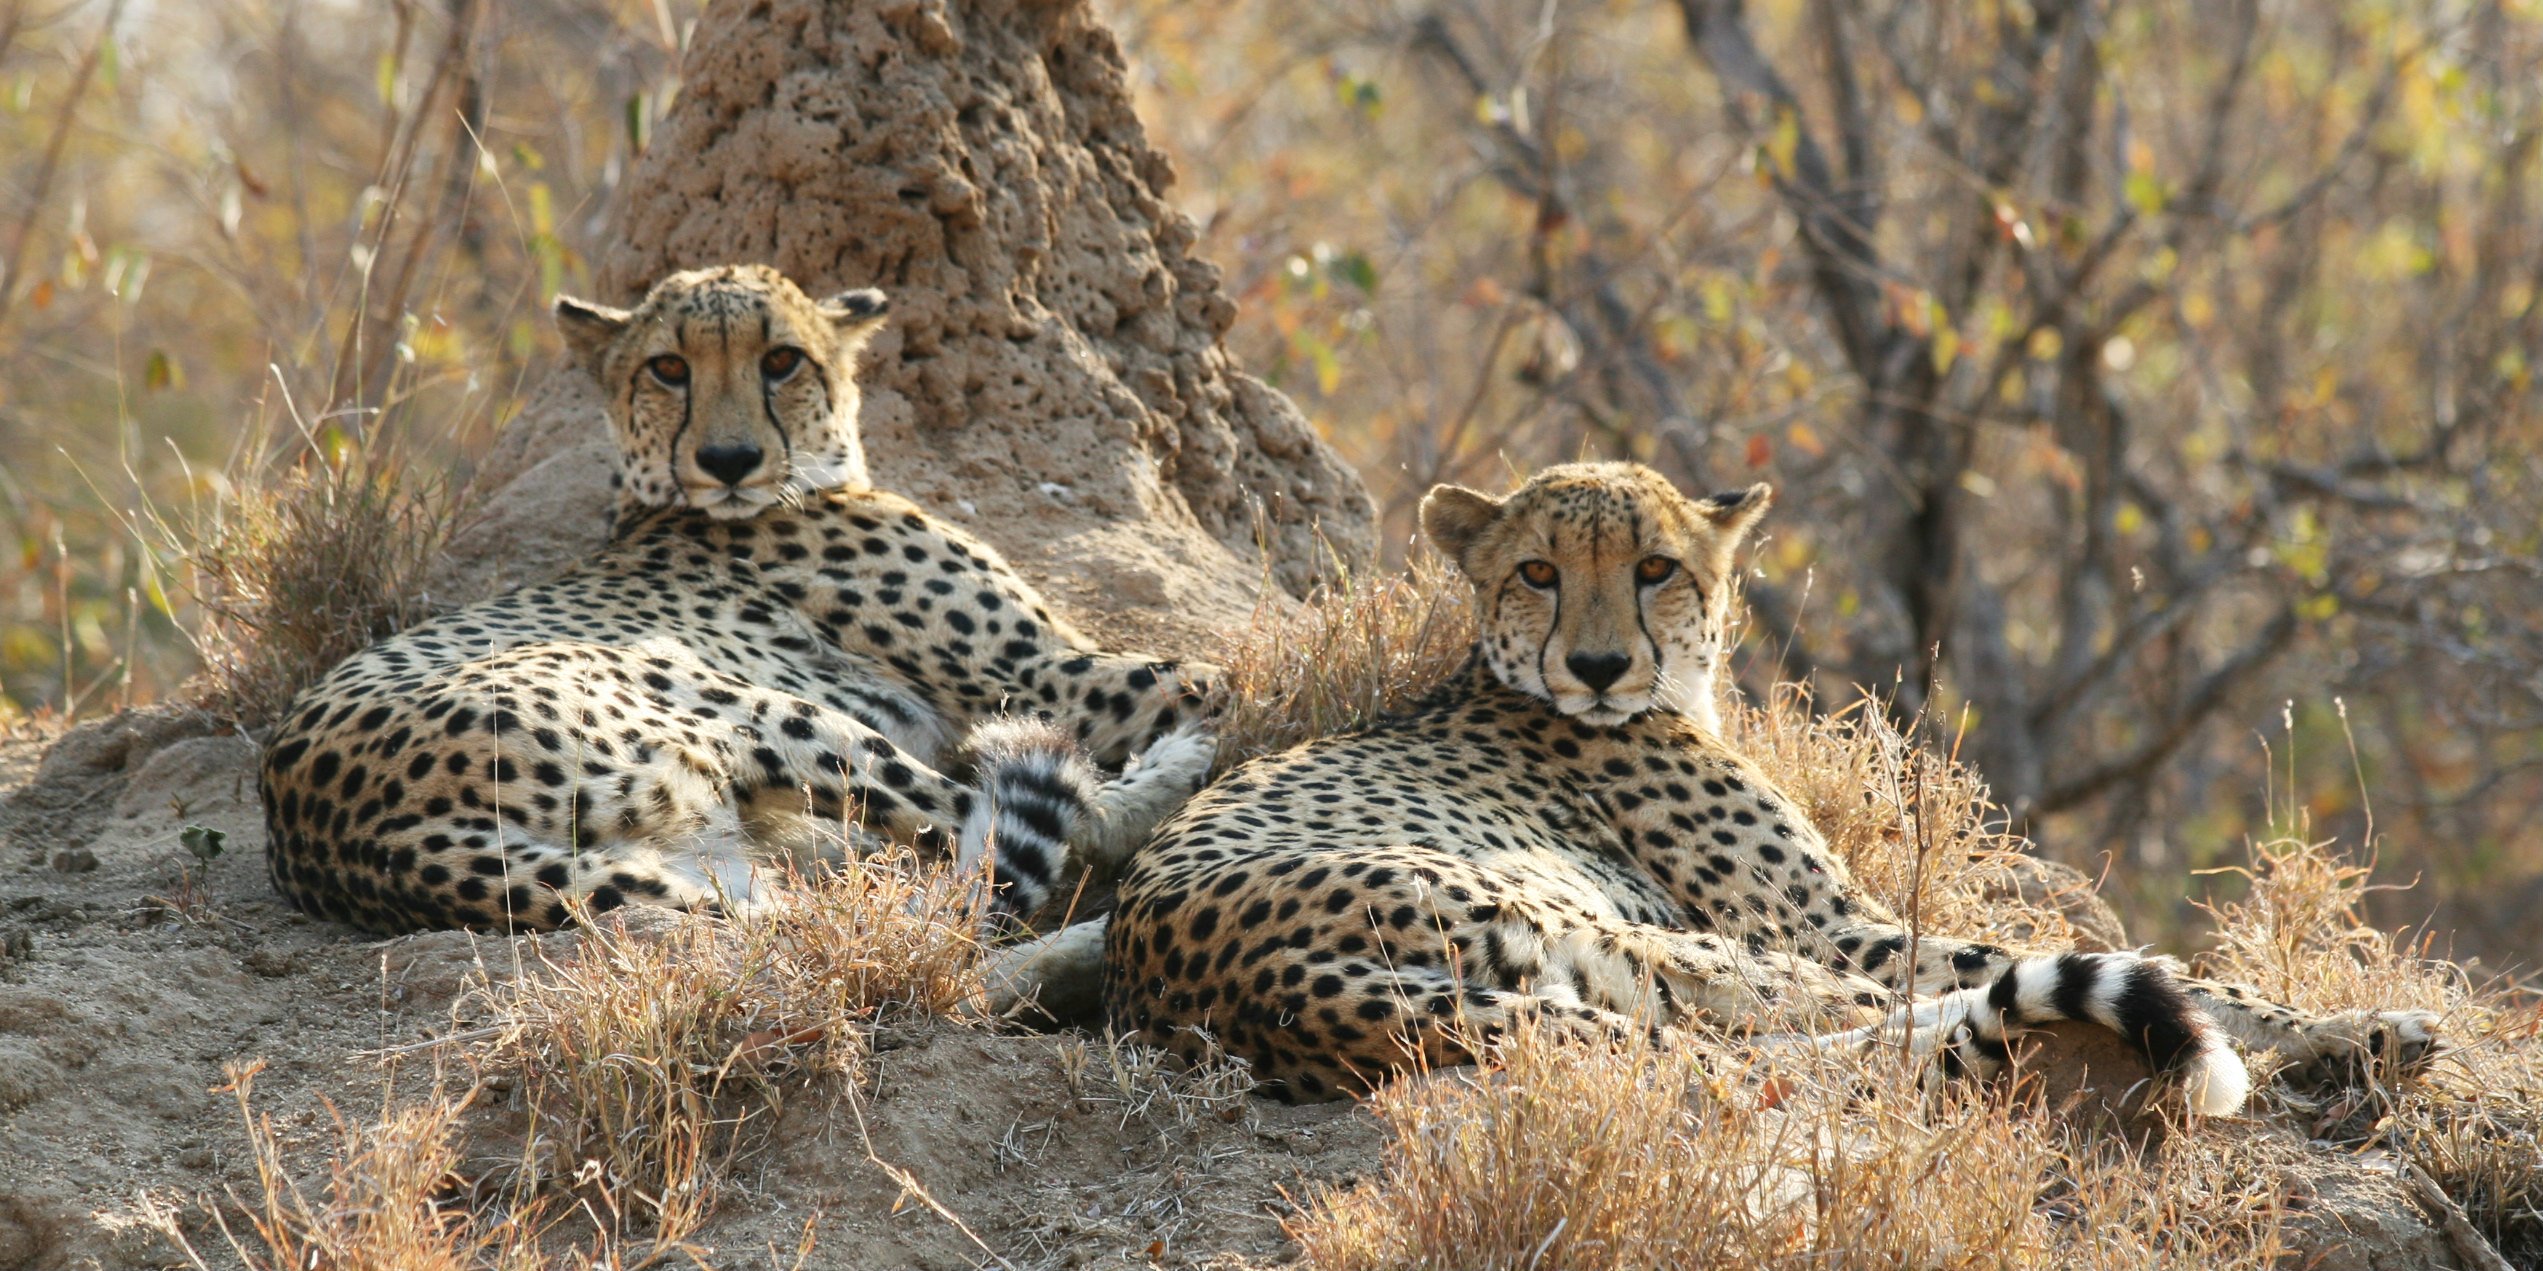 While volunteering with animals in Africa, you might spot these two cheetah males.